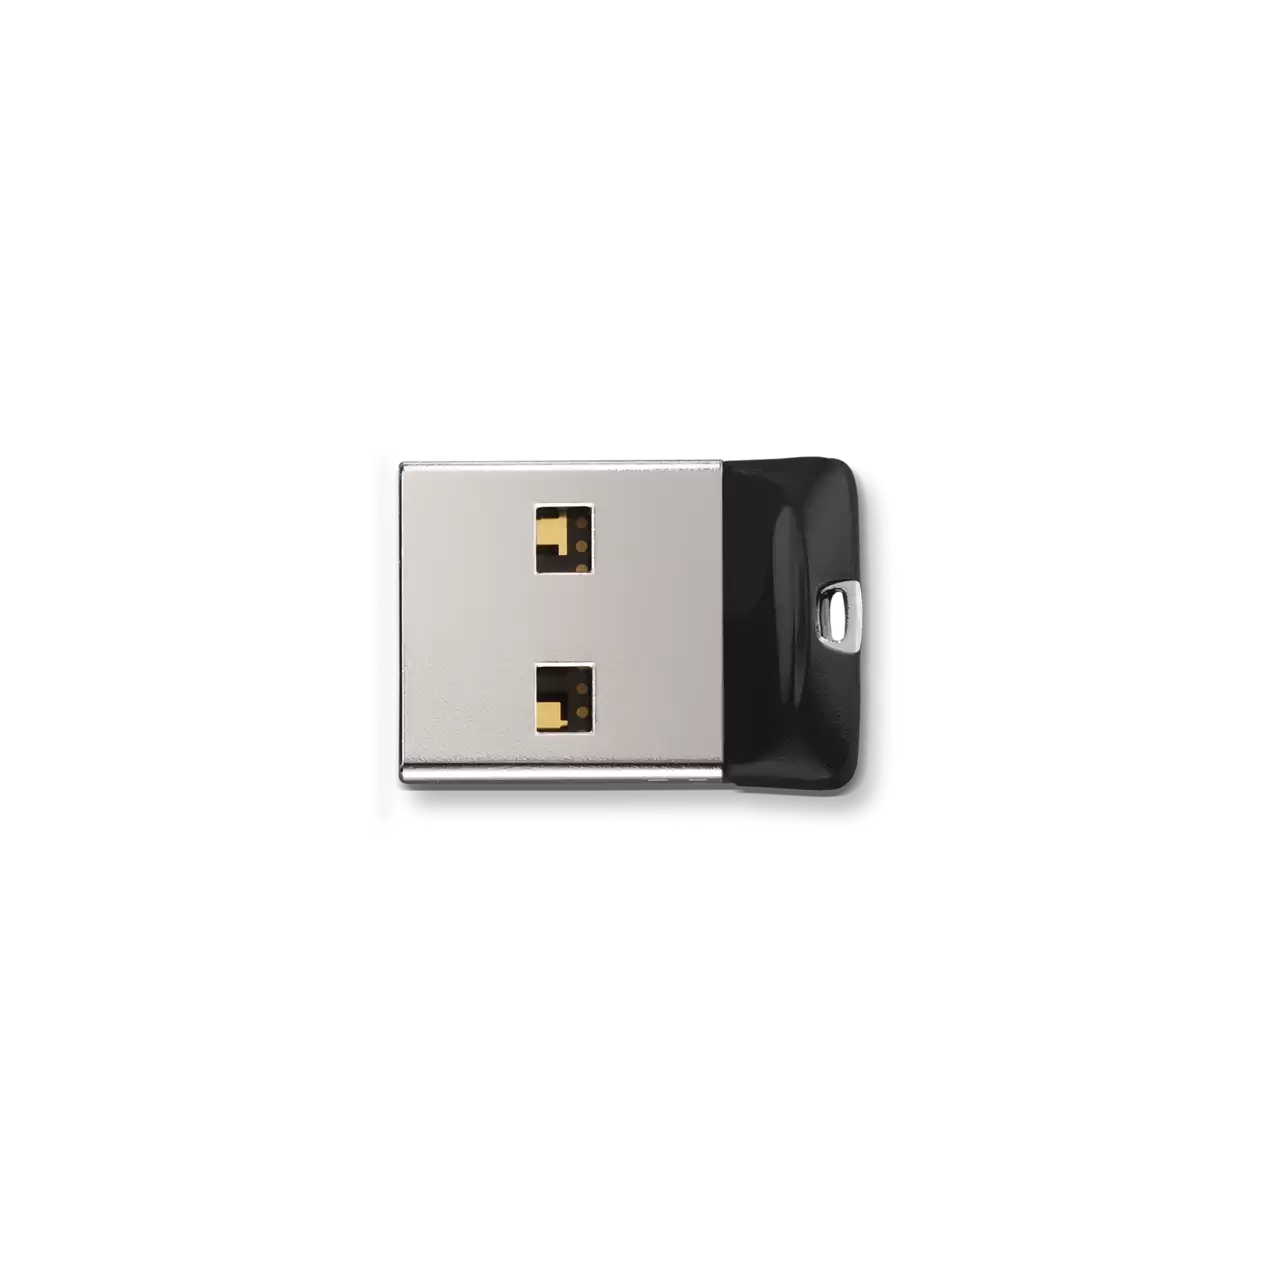 SanDisk Cruzer Fit USB 2.0 Flash Drive with SanDisk SecureAccess™ software (16GB / 32GB / 64GB) | SDCZ33-016G-G35 / SDCZ33-032G-G35 / SDCZ33-064G-G35)